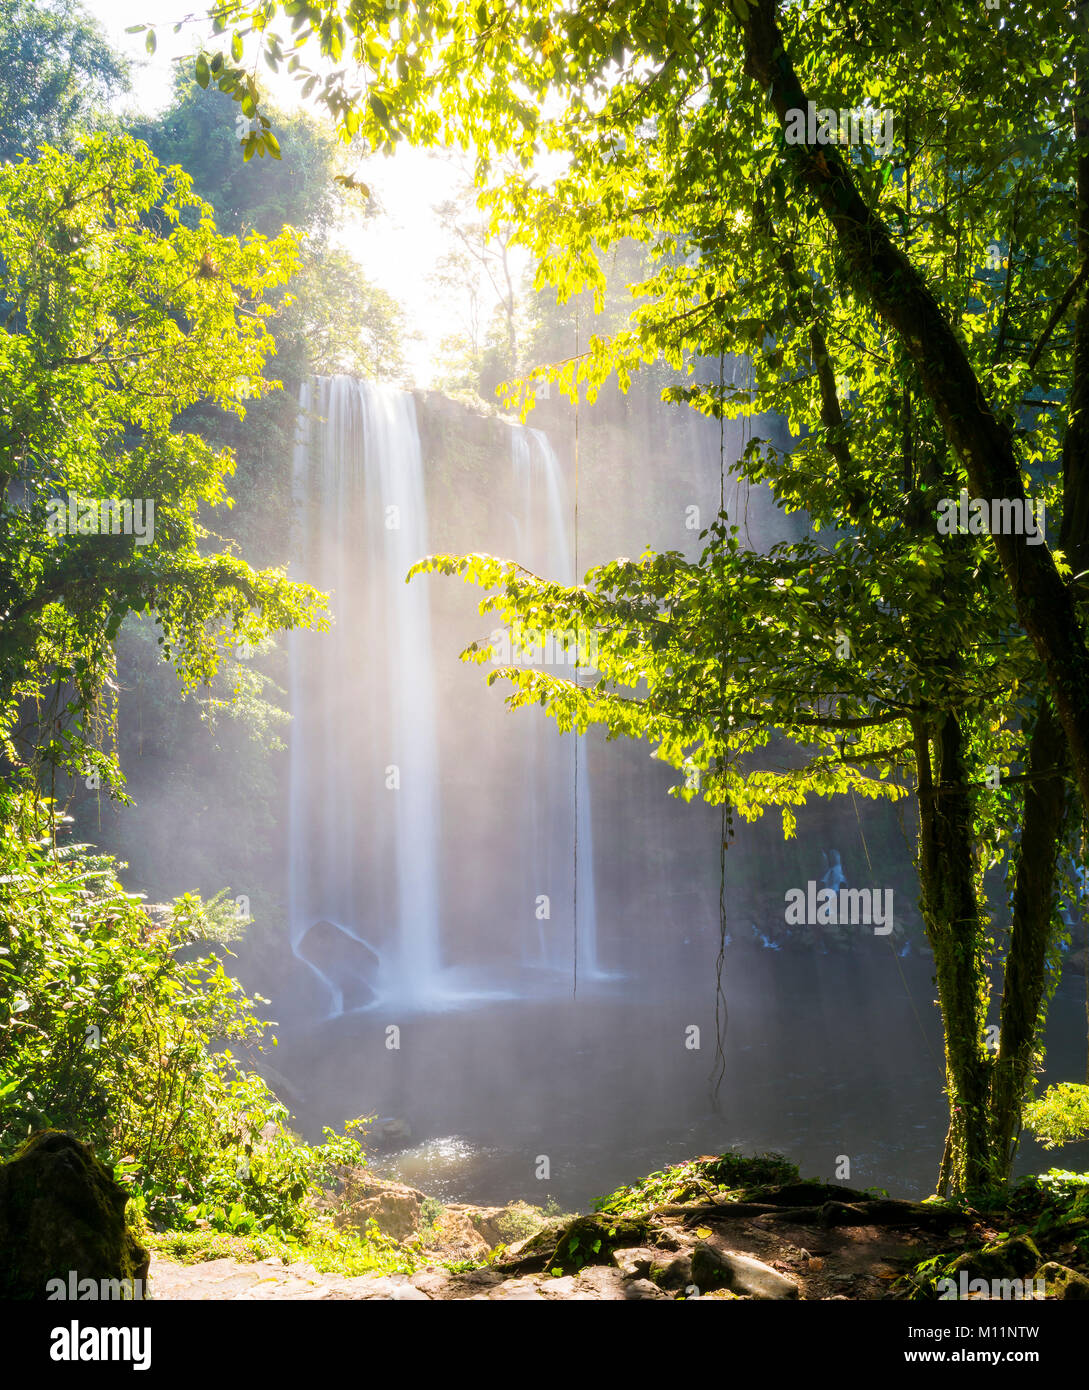 Misol Ha waterfall surrounded by forest near Palenque in Chiapas, Mexico Stock Photo